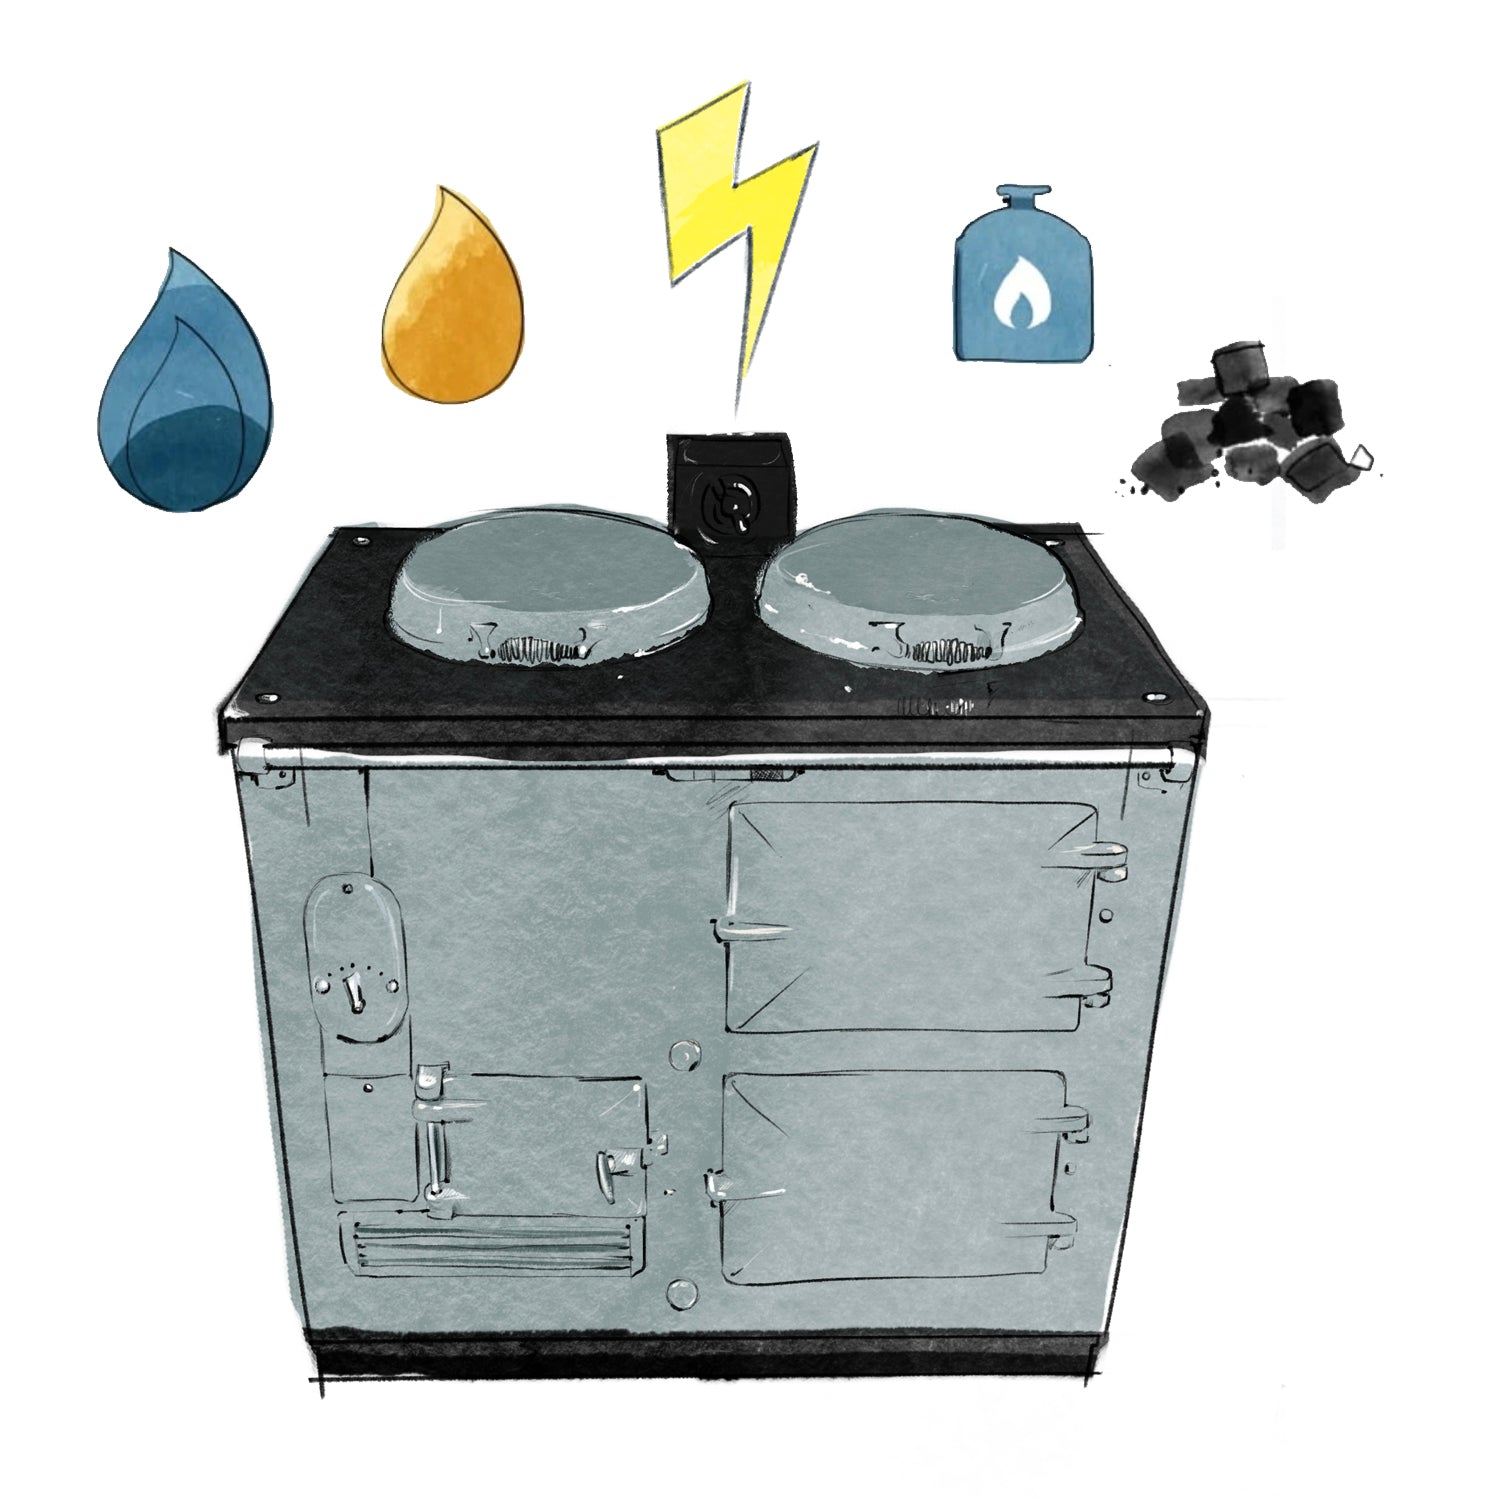 Fuel prices and running your Aga range cooker winter 2021 into Spring 2022